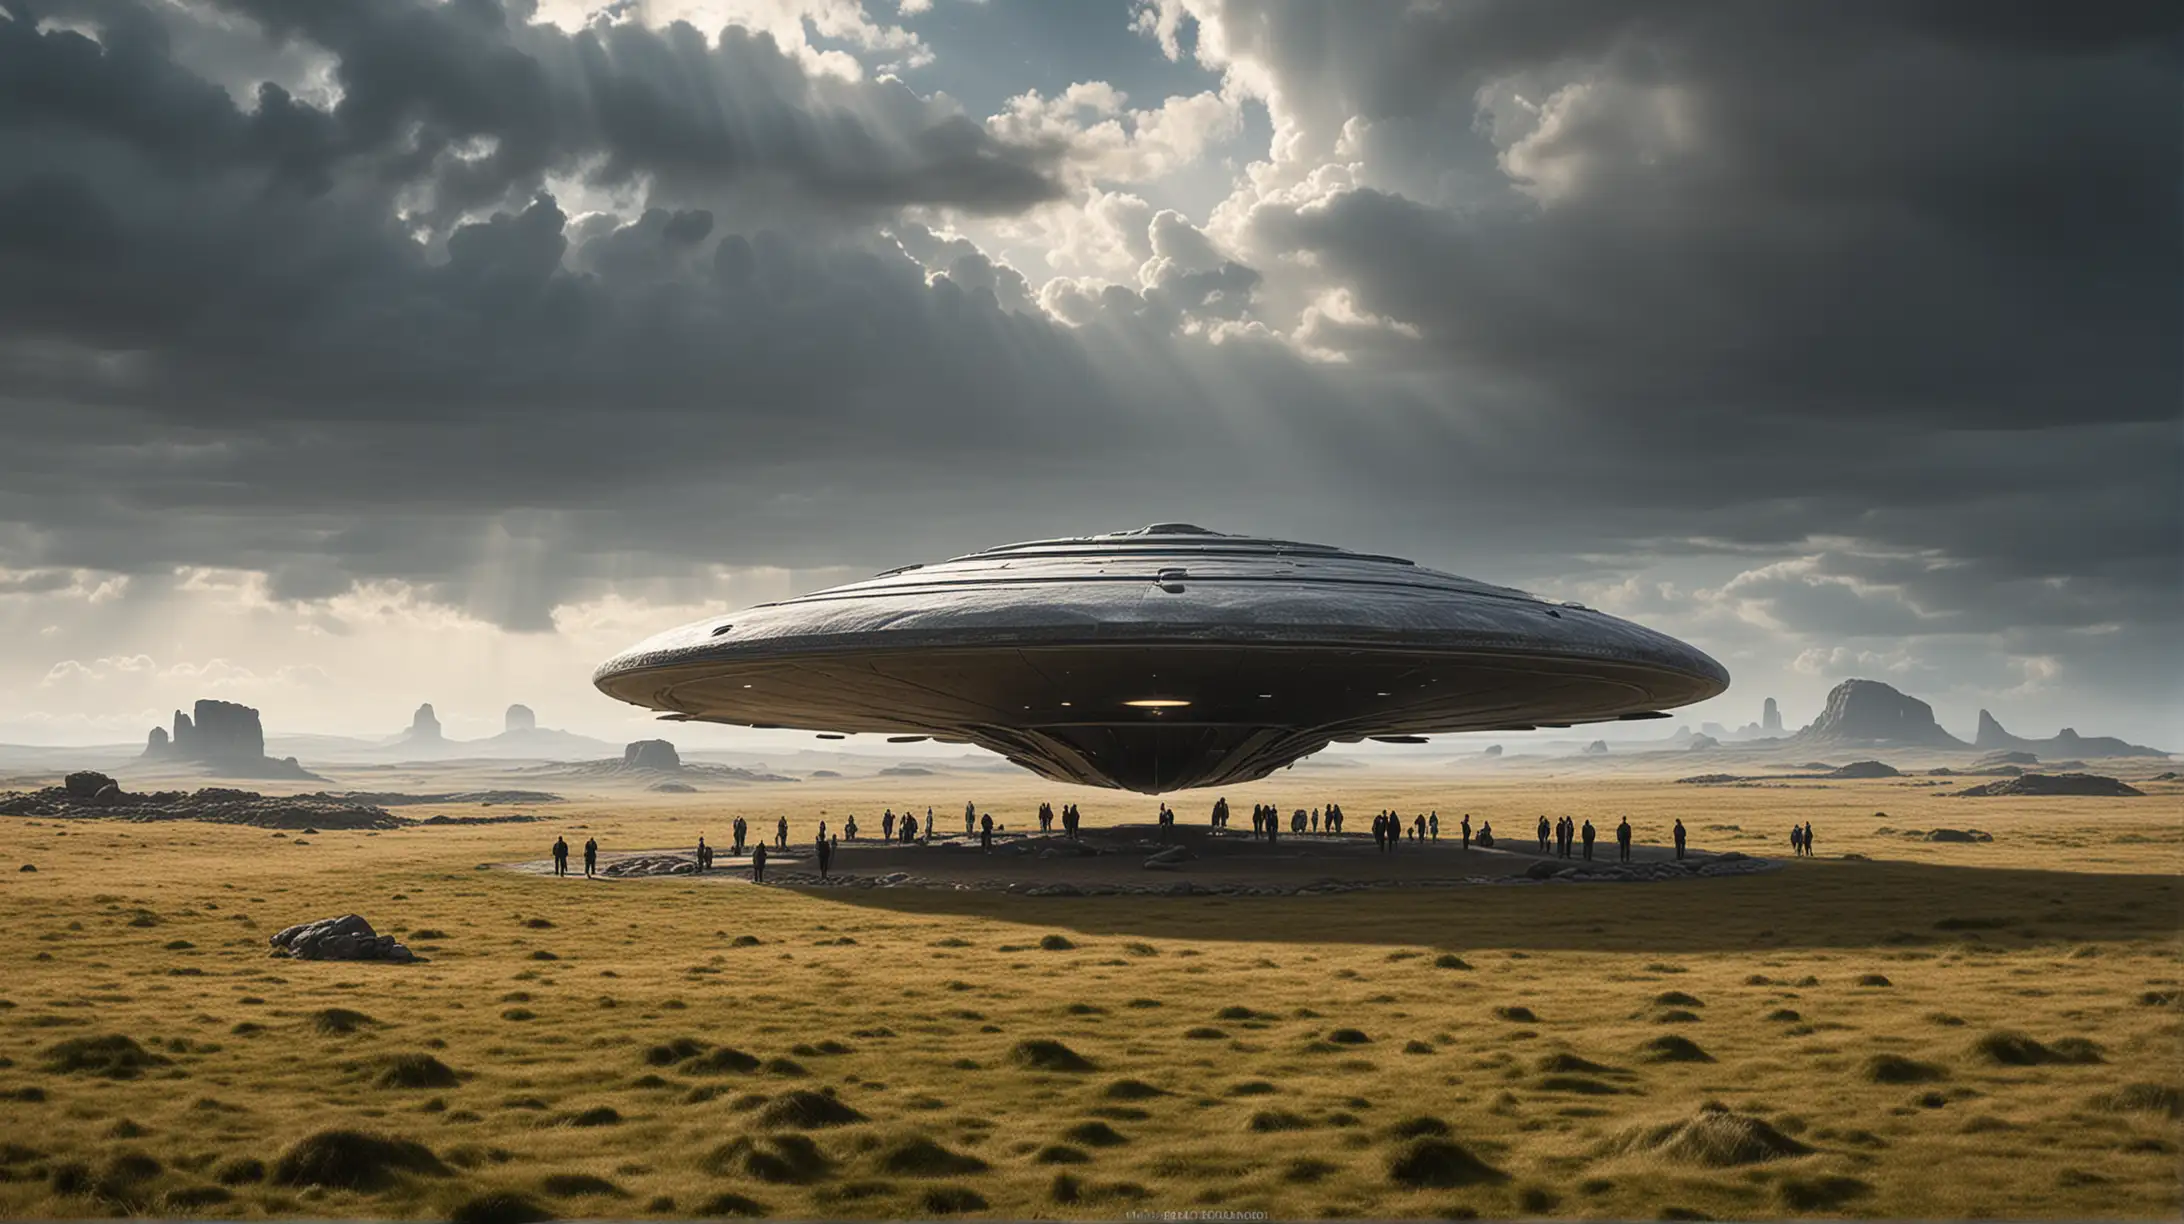 imagine a large flying-saucer space ship, which has landed in the middle of a neo-lithic stone circle